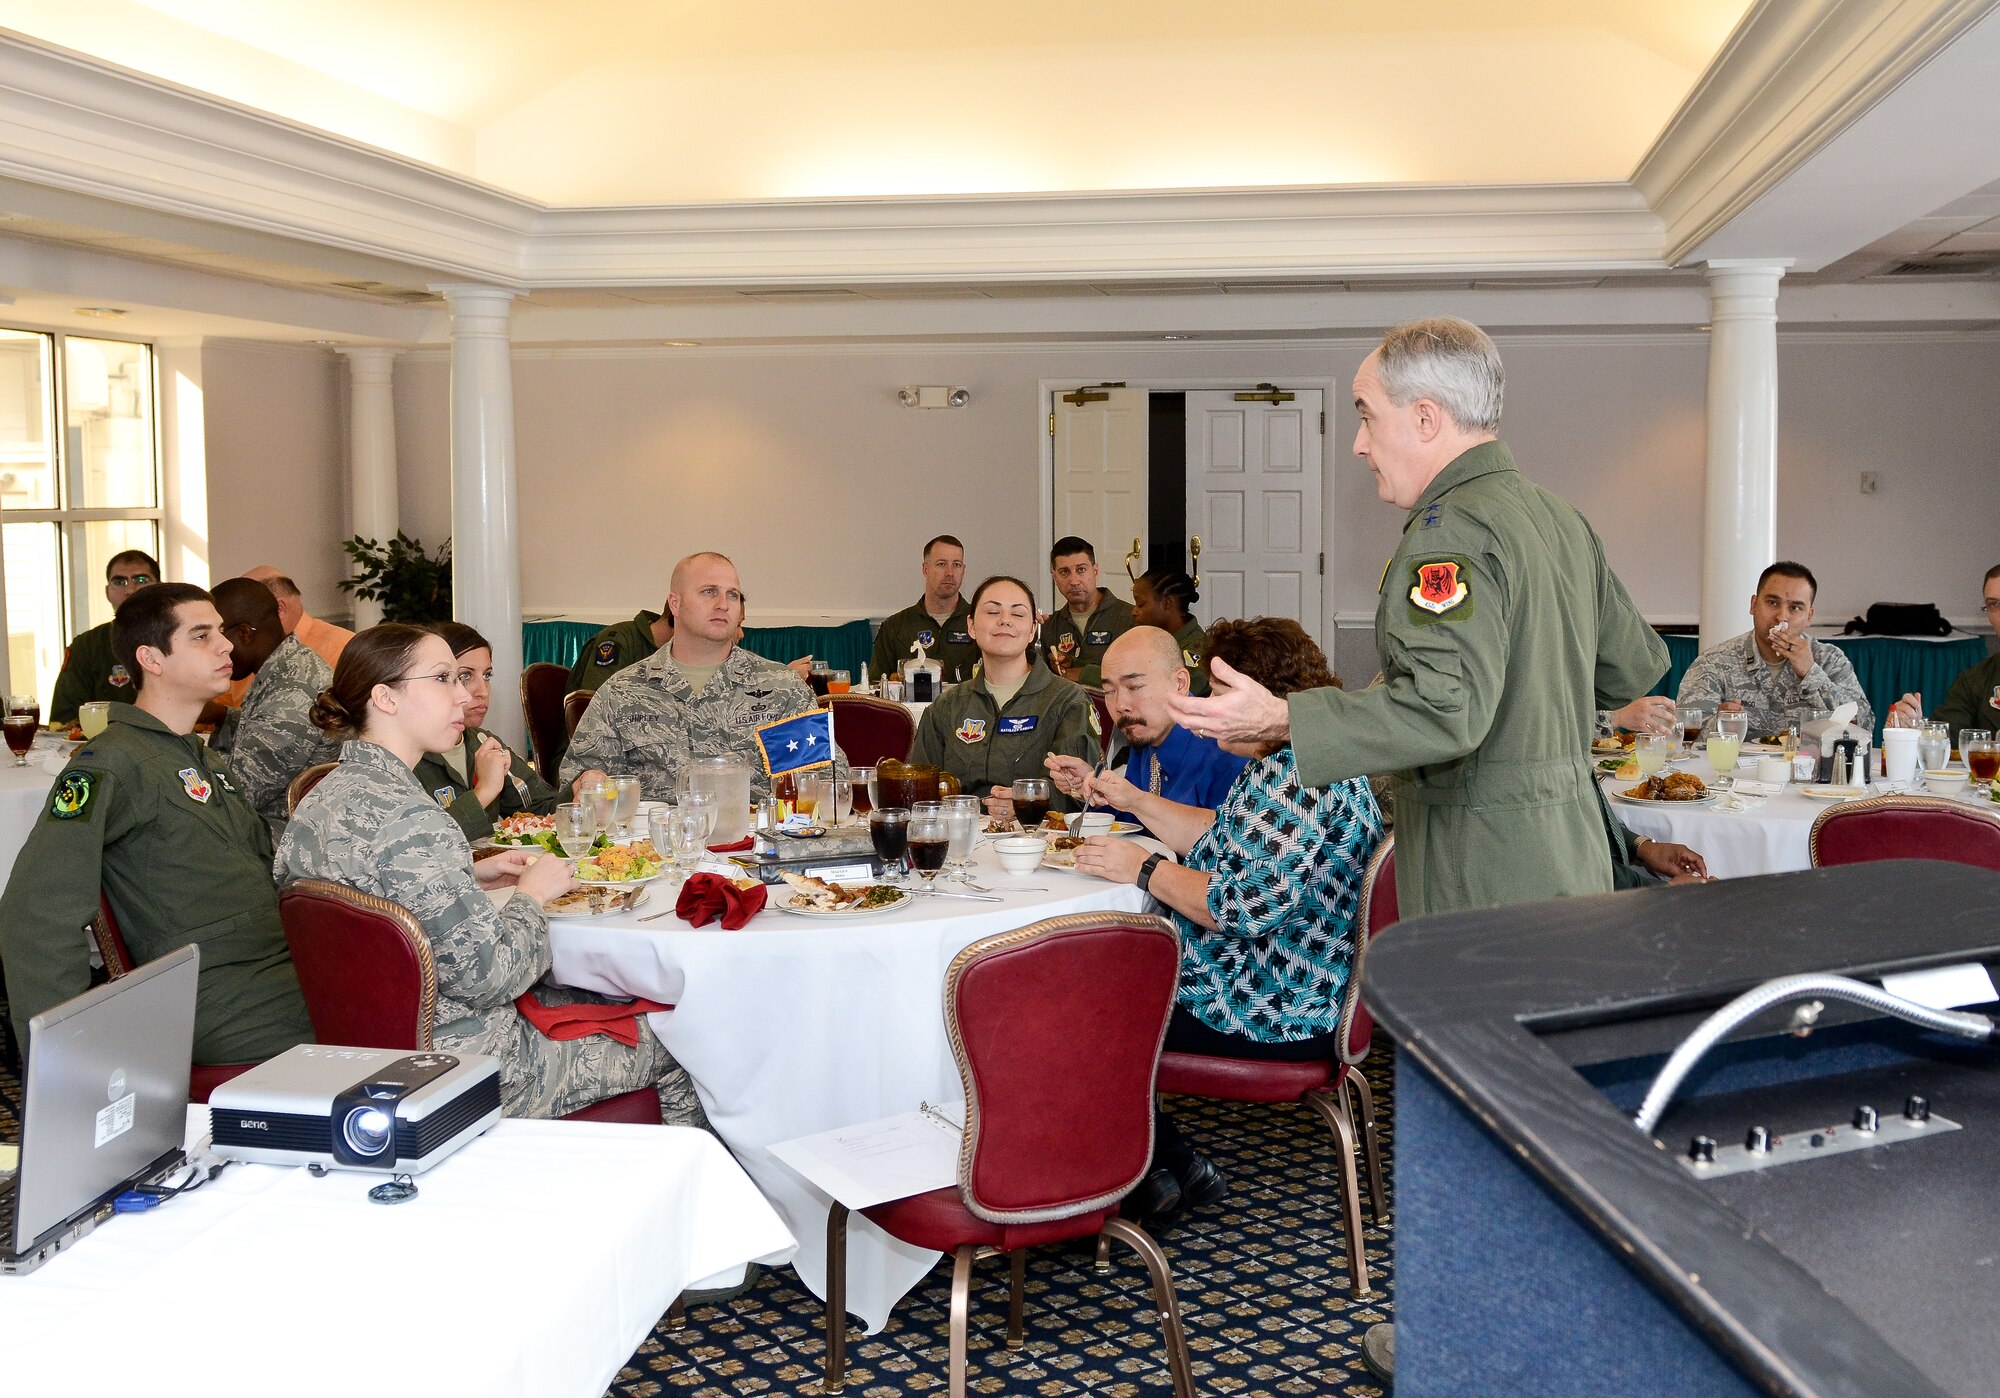 Maj. Gen. James Poss, standing, assistant deputy chief of staff for intelligence, surveillance and reconnaissance, Headquarters U.S. Air Force, speaks to intelligence officers and civilians during a lunch at the Horizon's Club, Robins Air Force Base, Ga., Jan. 26, 2012.  Poss met with intelligence personnel at Robins during a two-day  intelligence organizations site visit.   (National Guard photo by Master Sgt. Roger Parsons/Released)